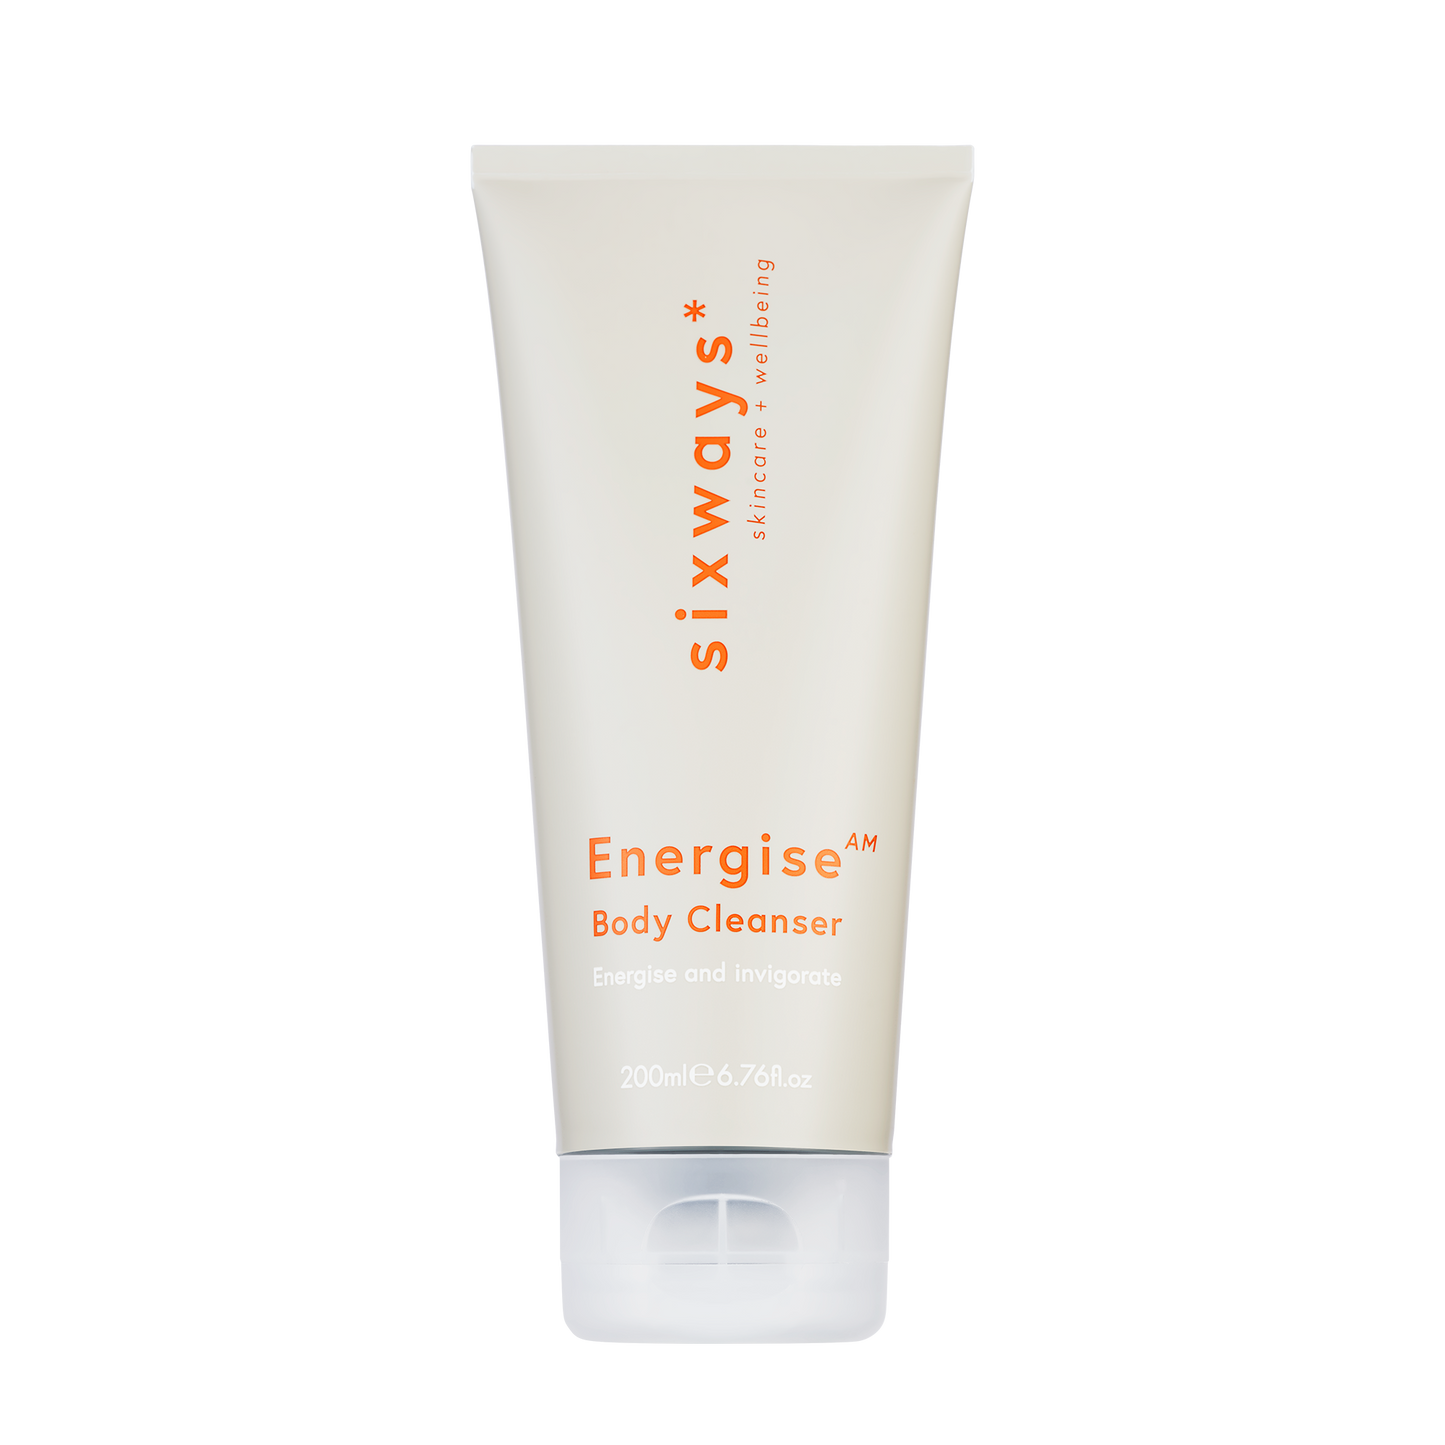 Energise AM Body Cleanser